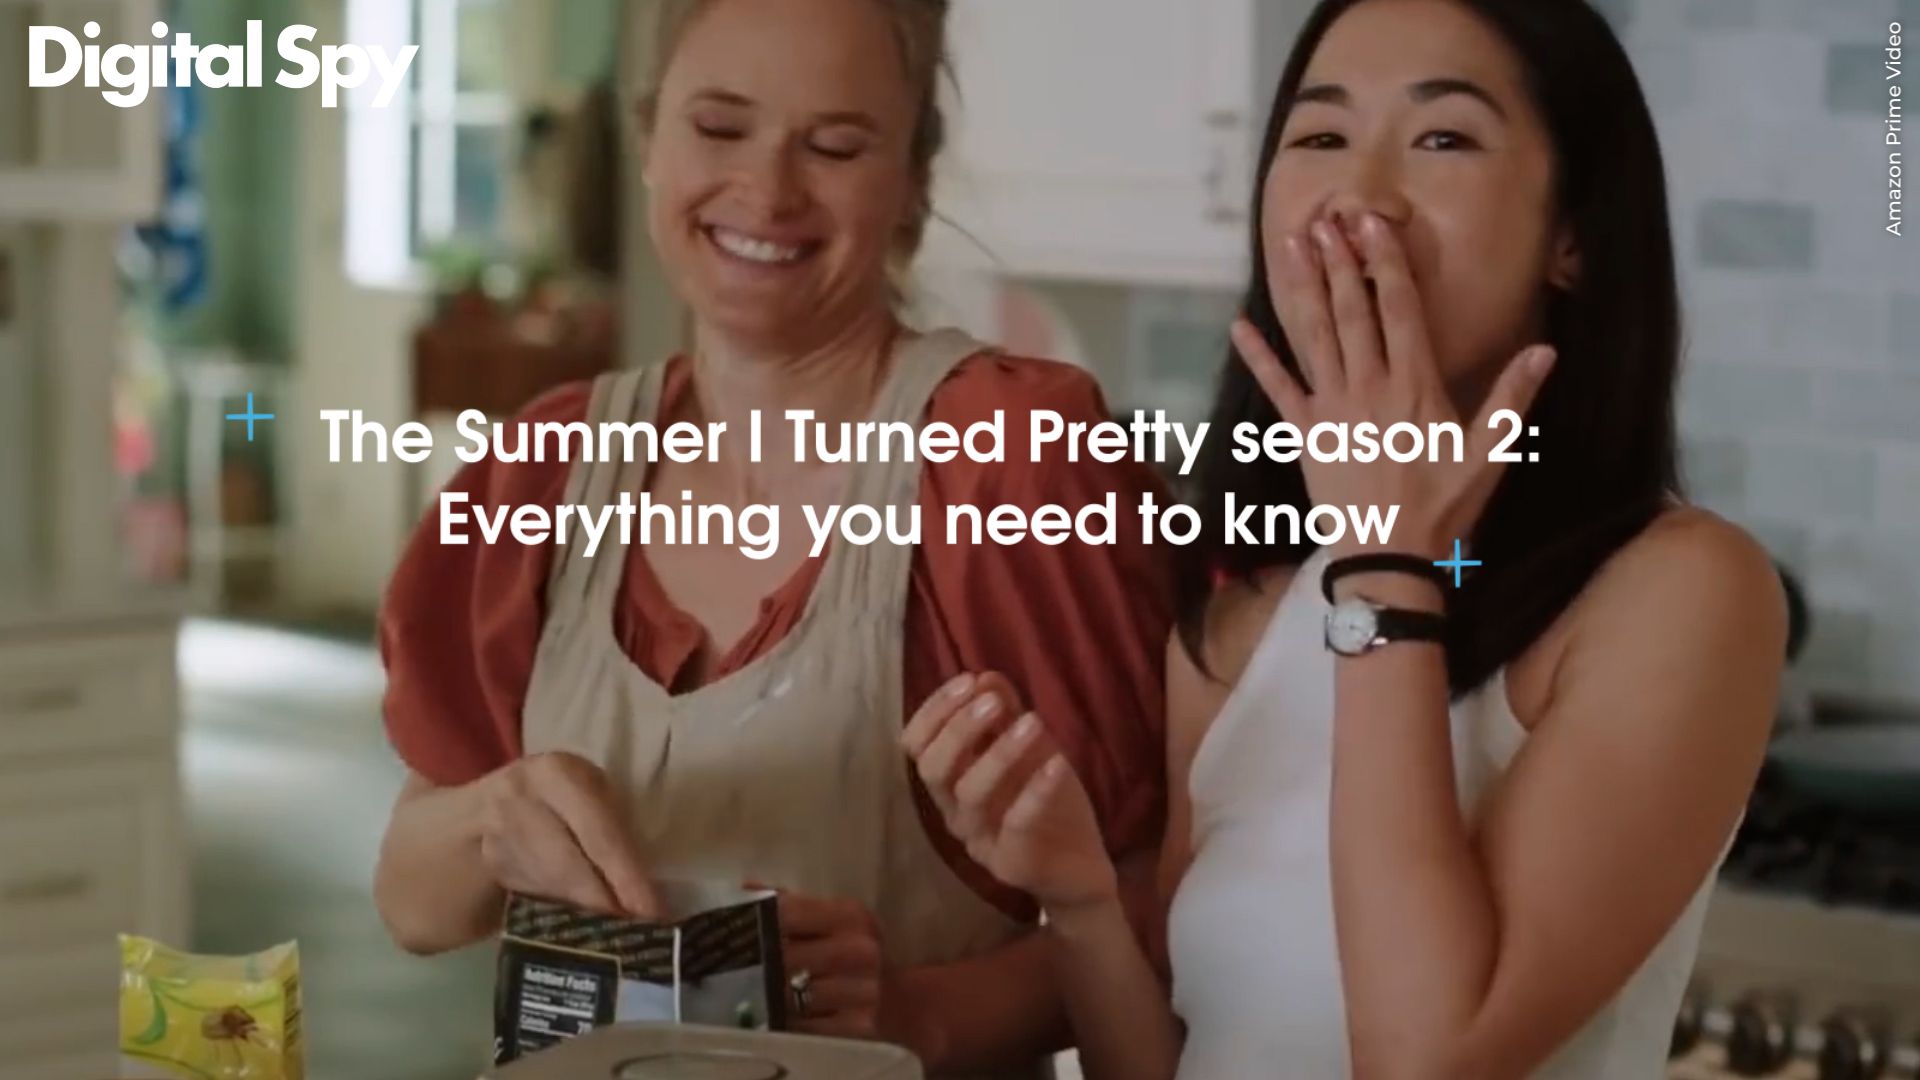 The Summer I Turned Pretty' season 2 released early